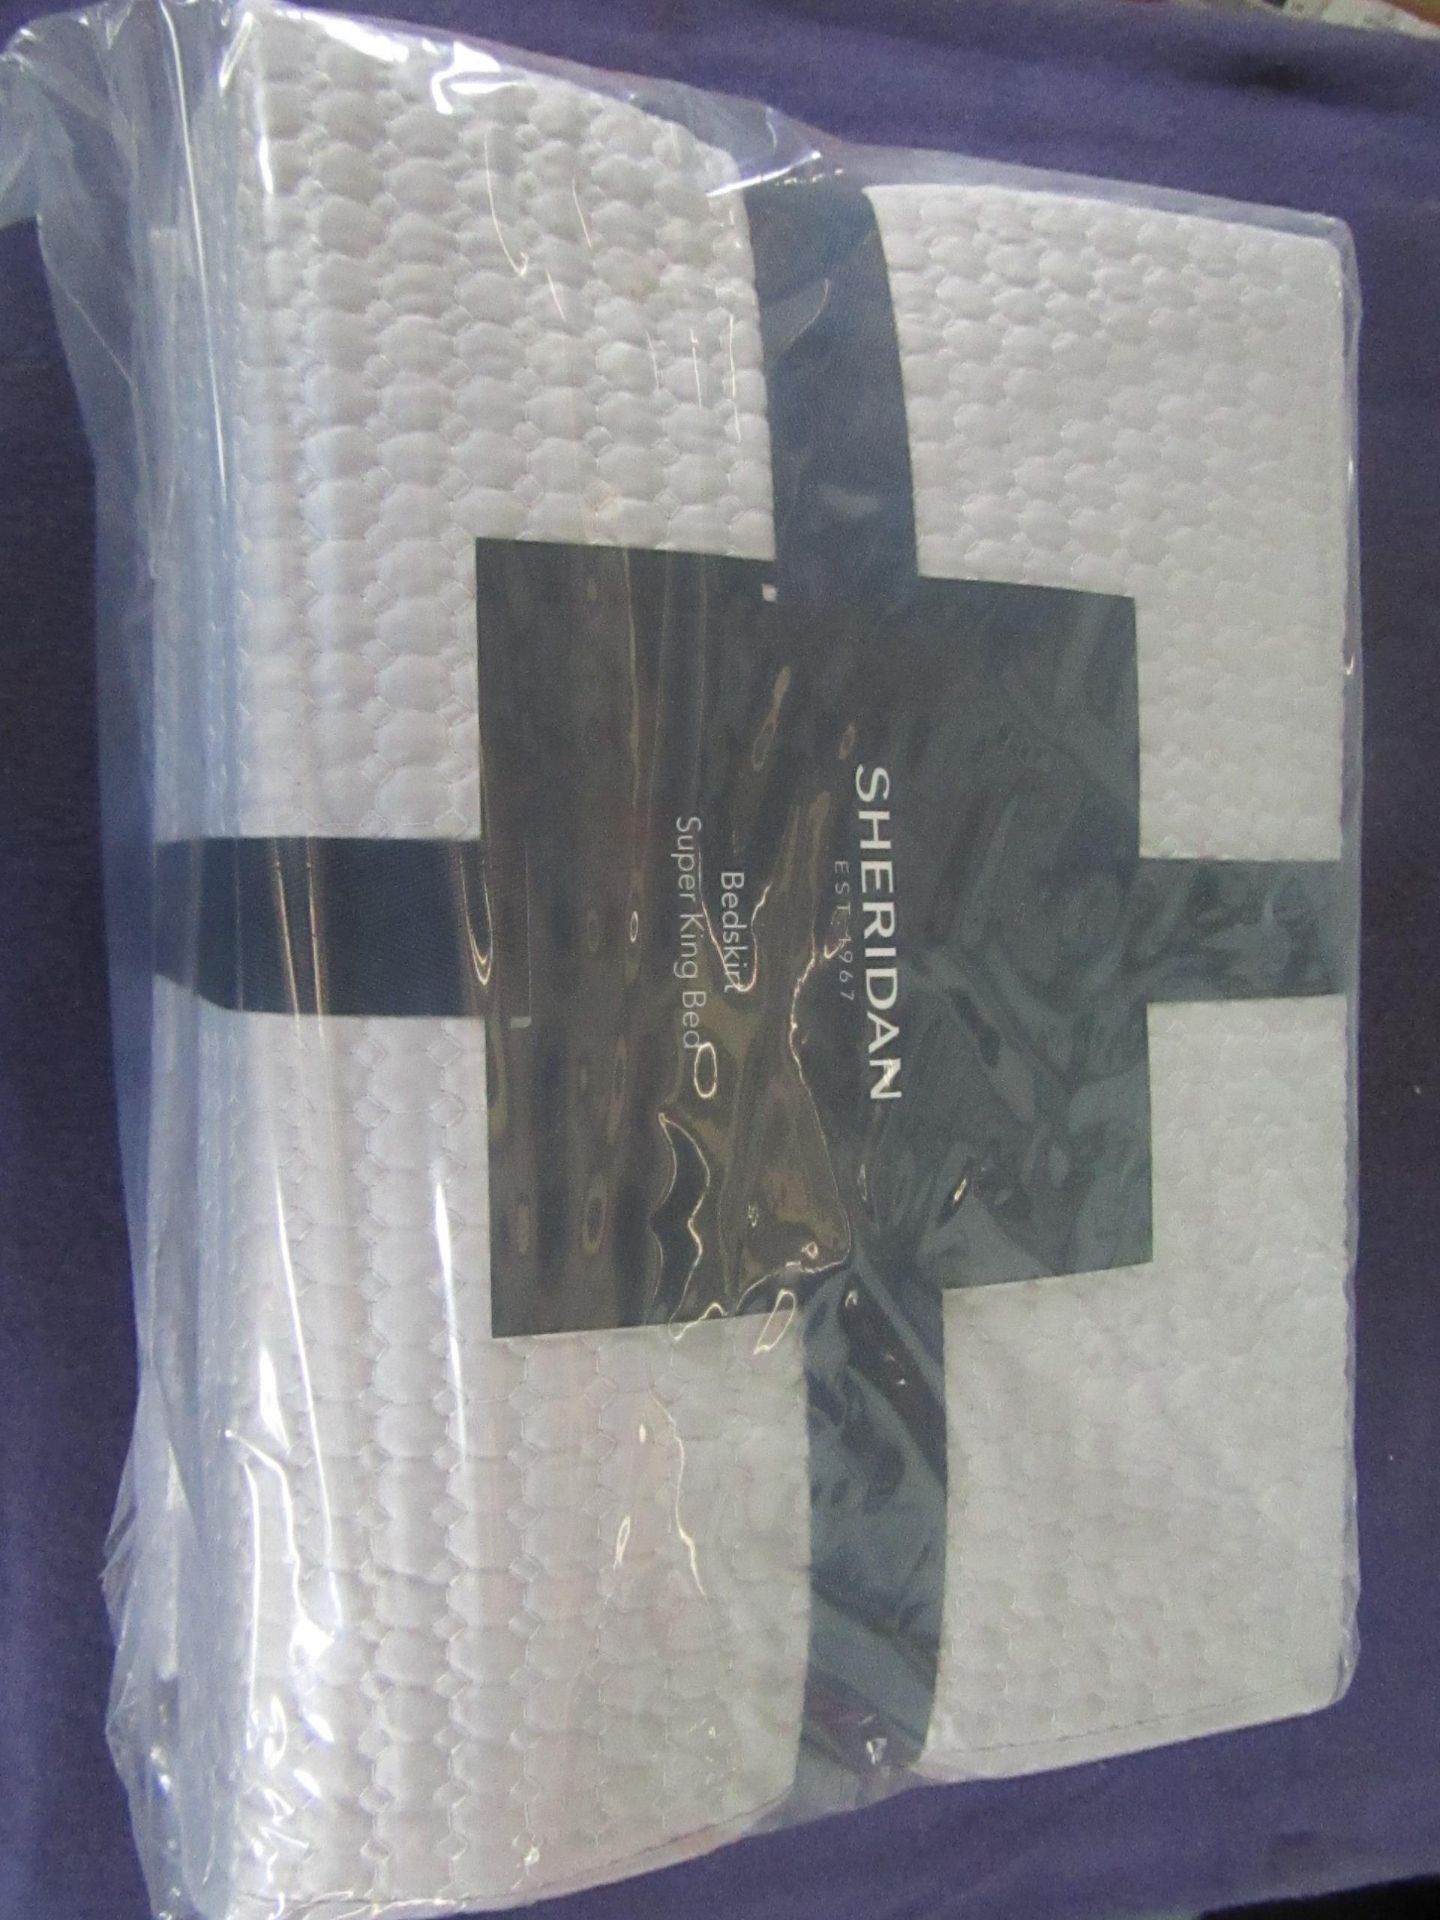 3x Sheridan - Dove Super King Sized Bed Skirt - New & Packaged. RRP œ75.